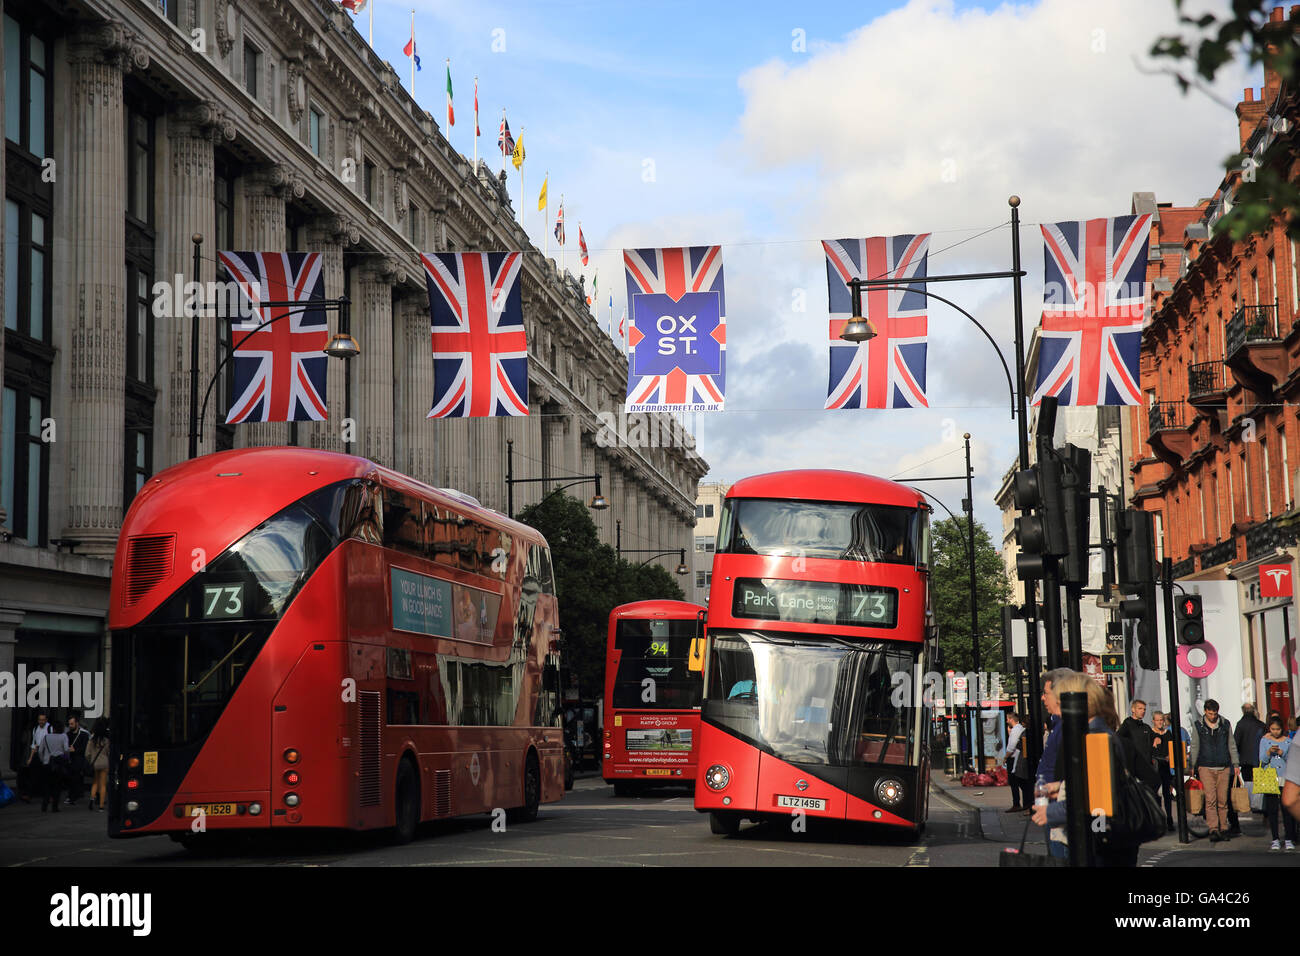 Union Jack flags and red buses line Oxford Street, next to Selfridges department store, in central London, England, UK Stock Photo